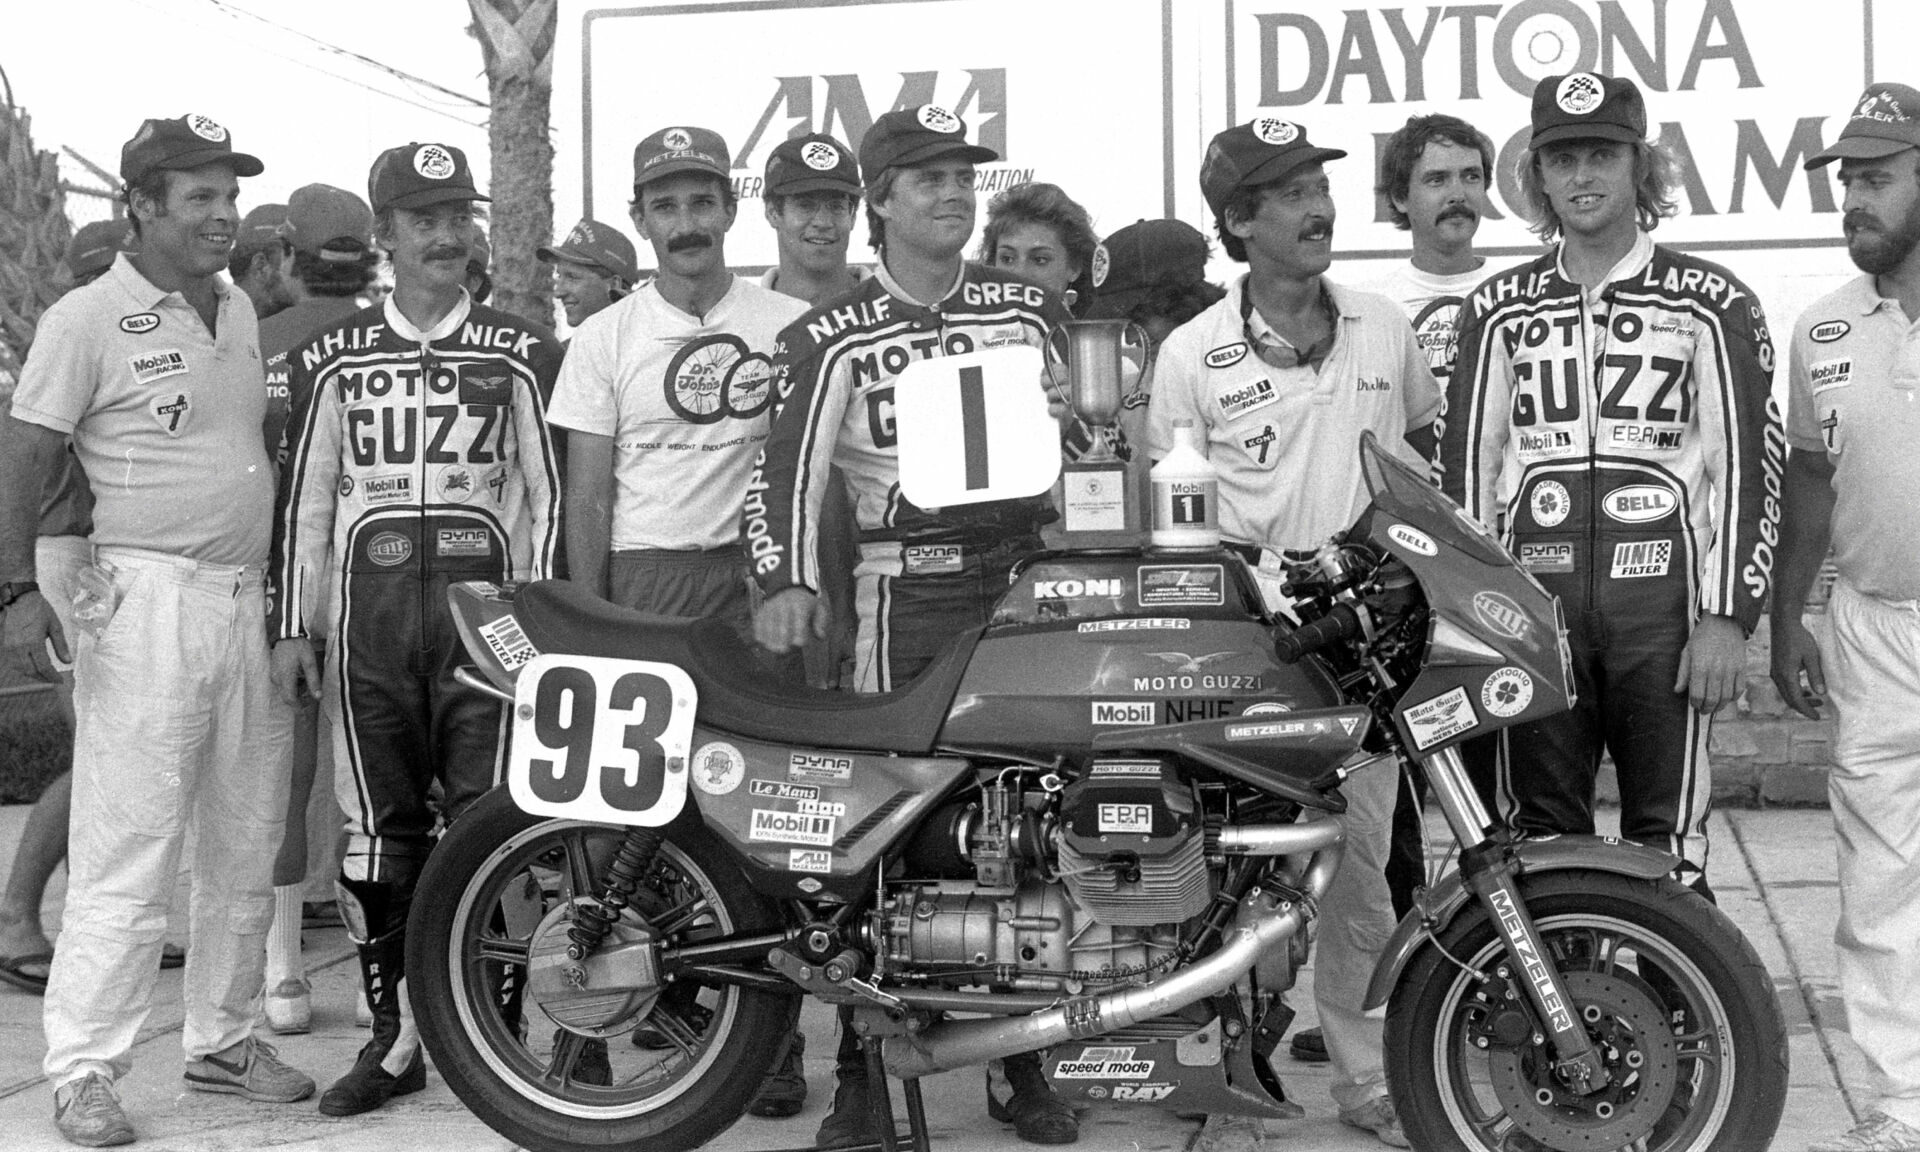 Dr. John Wittner (fourth from right) at Daytona in 1985. Photo by Larry Lawrence/The Rider Files.